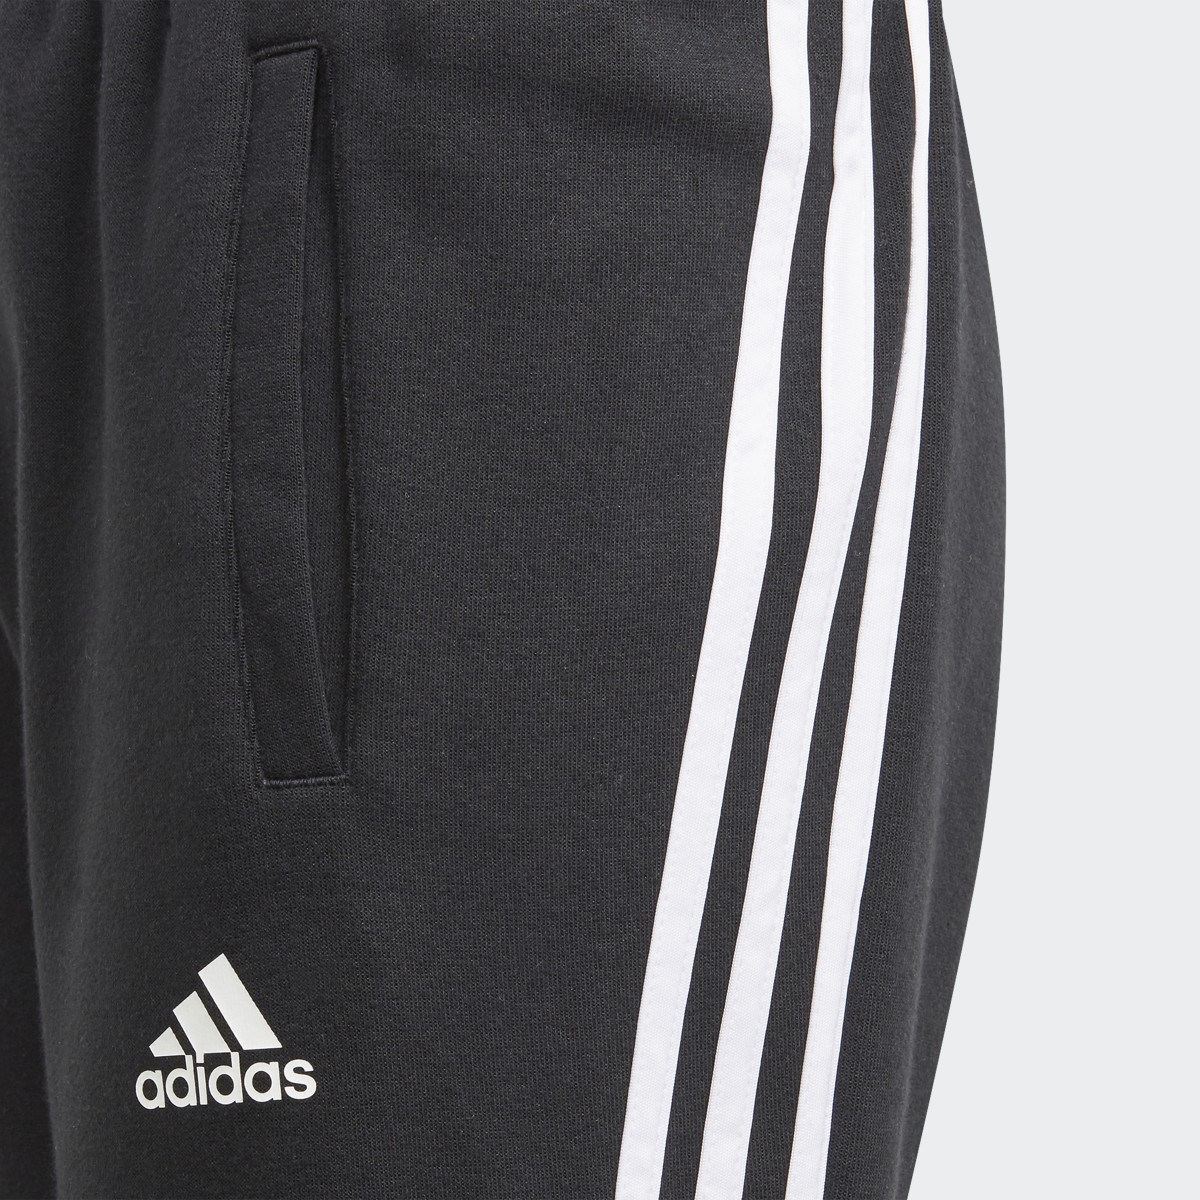 Adidas 3-Stripes Tapered Leg Tracksuit Bottoms. 4